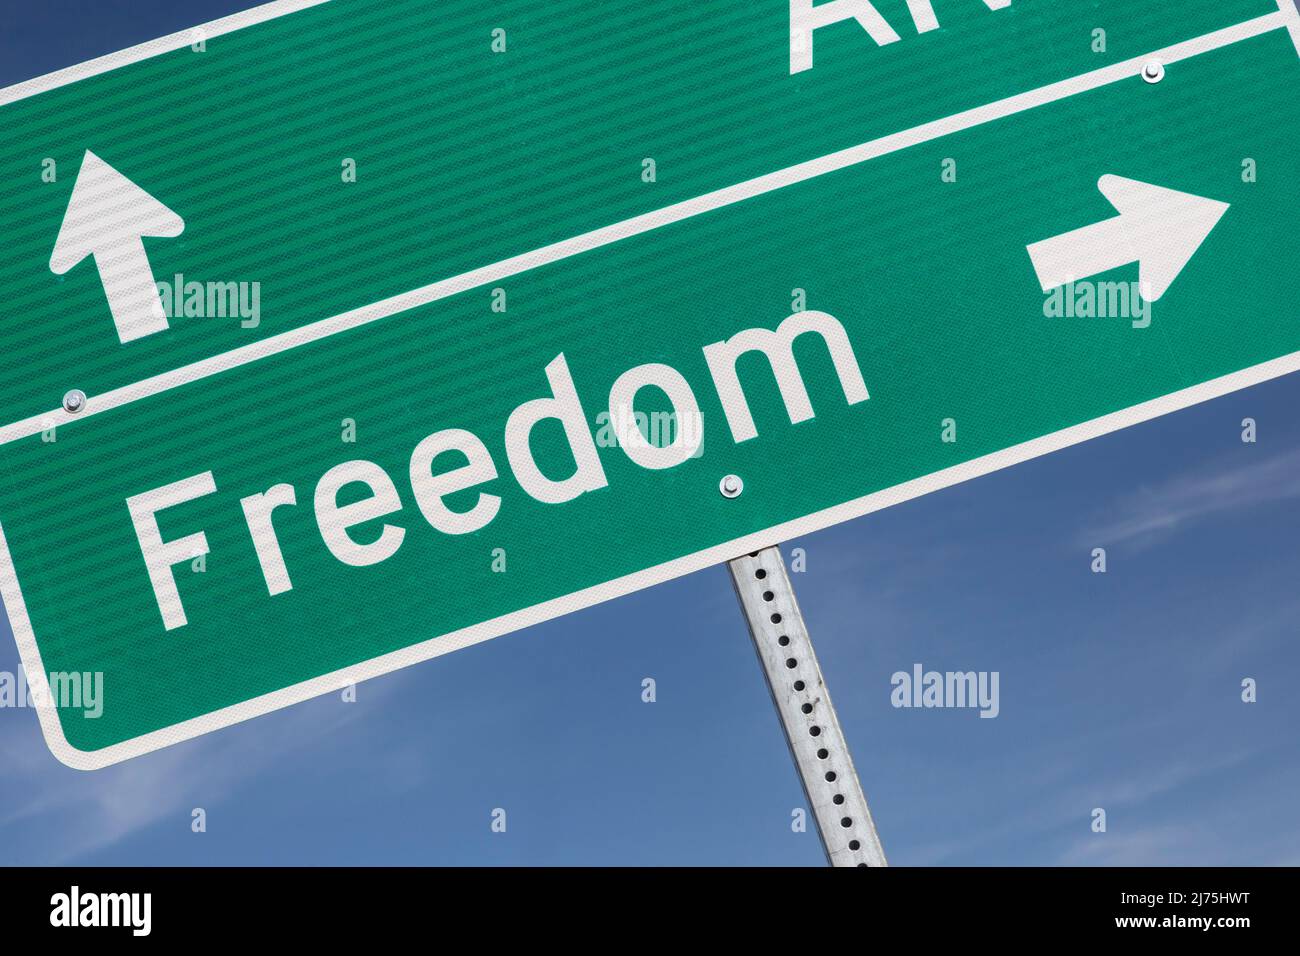 Freedom, Oklahoma - A road sign points towards the small town of Freedom in western Oklahoma. Stock Photo